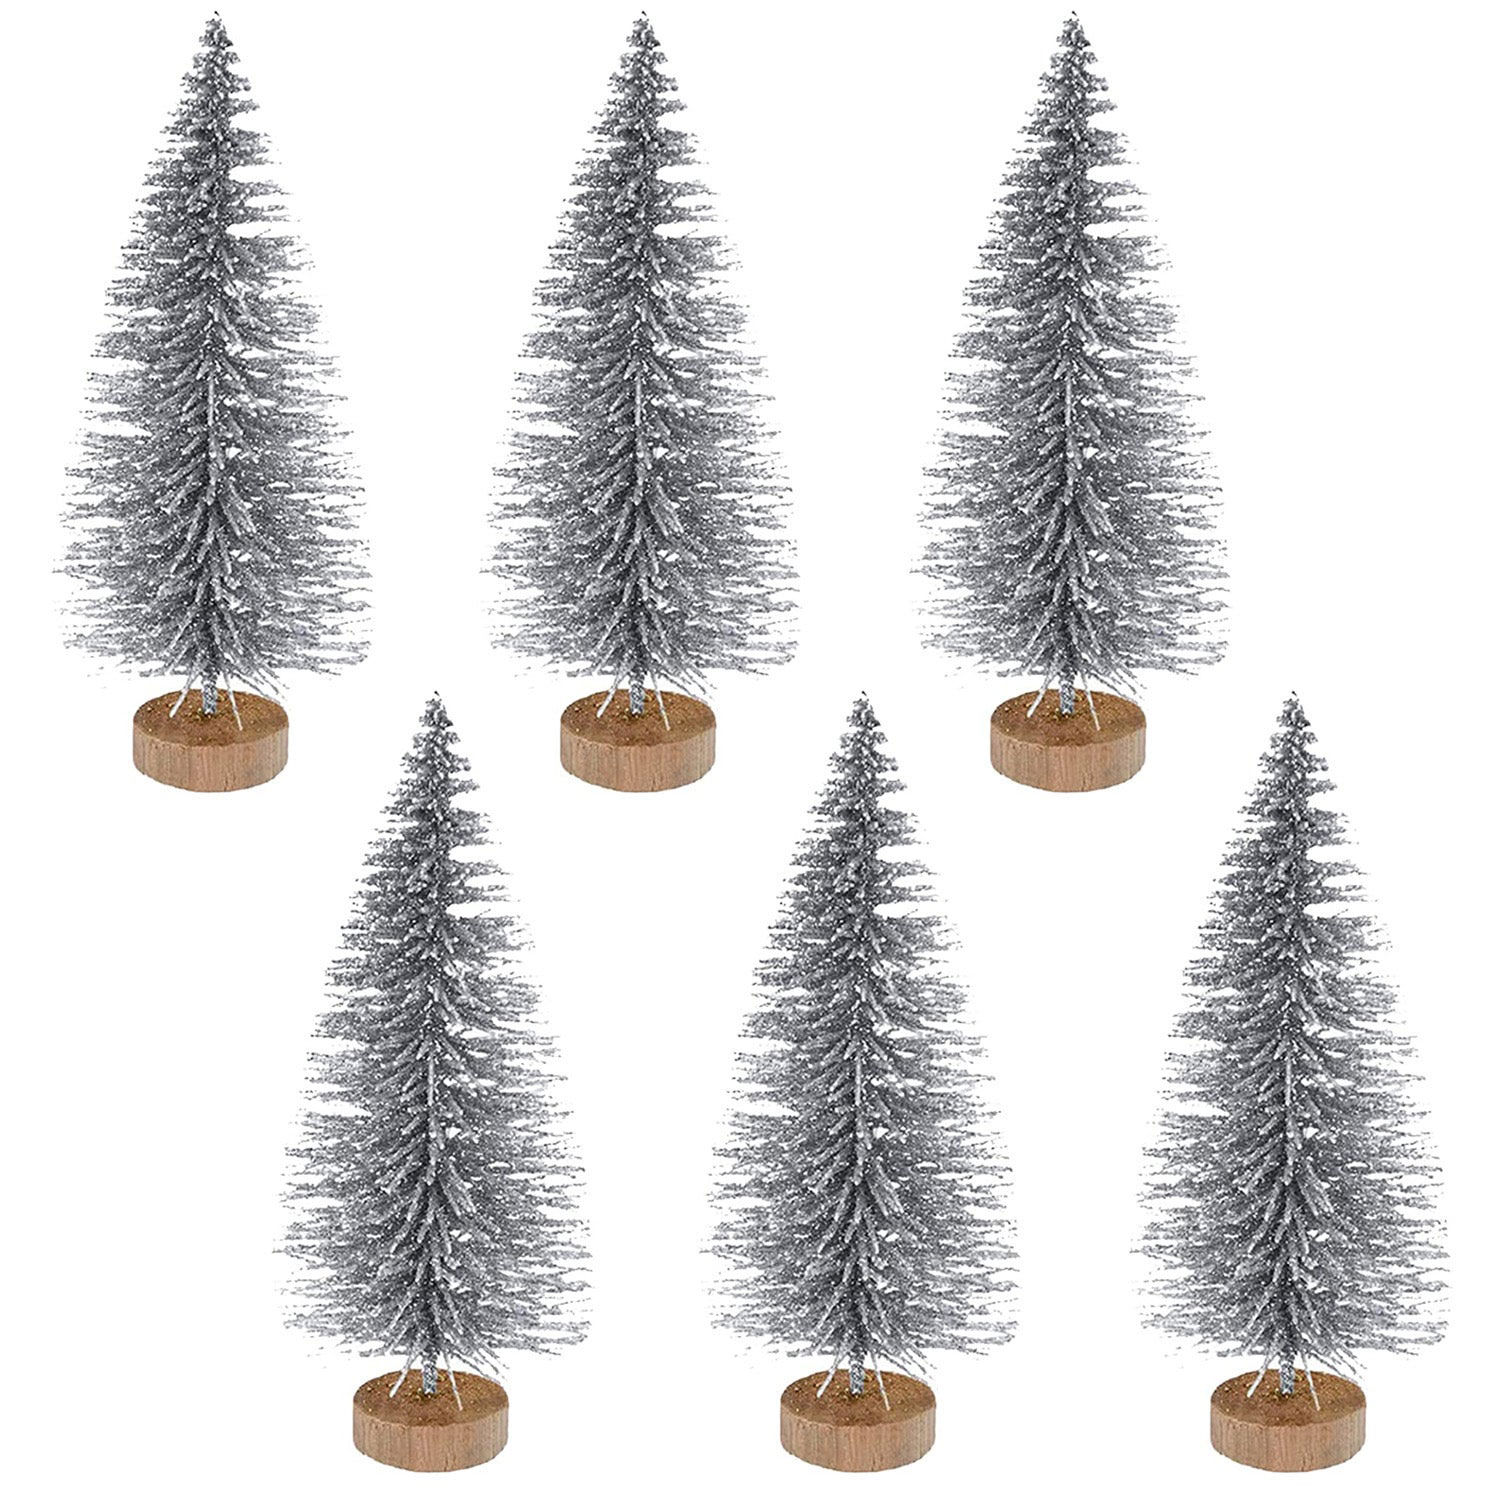 3.5" Snow-Tipped Silver Christmas Tree Cake Toppers